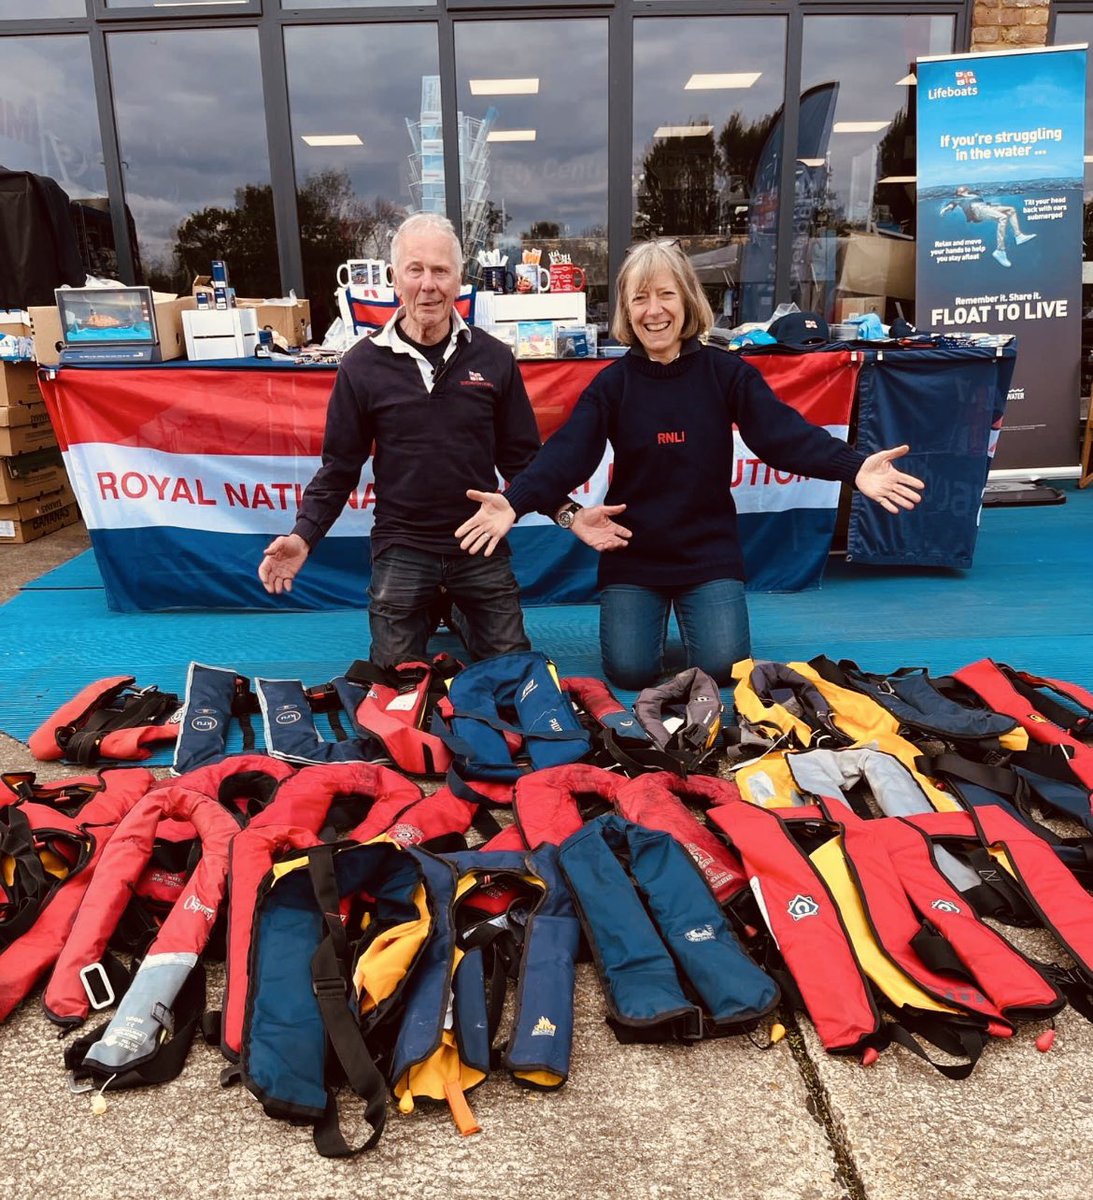 Teddington RNLI Lifeboat Station ran a lifejacket clinic at Shepperton Marina today in conjunction with Lindon Lewis Marine. 87 lifejackets were checked, 33 of which were condemned and 29 needed servicing. Never take safety equipment for granted and respect the water #rnli